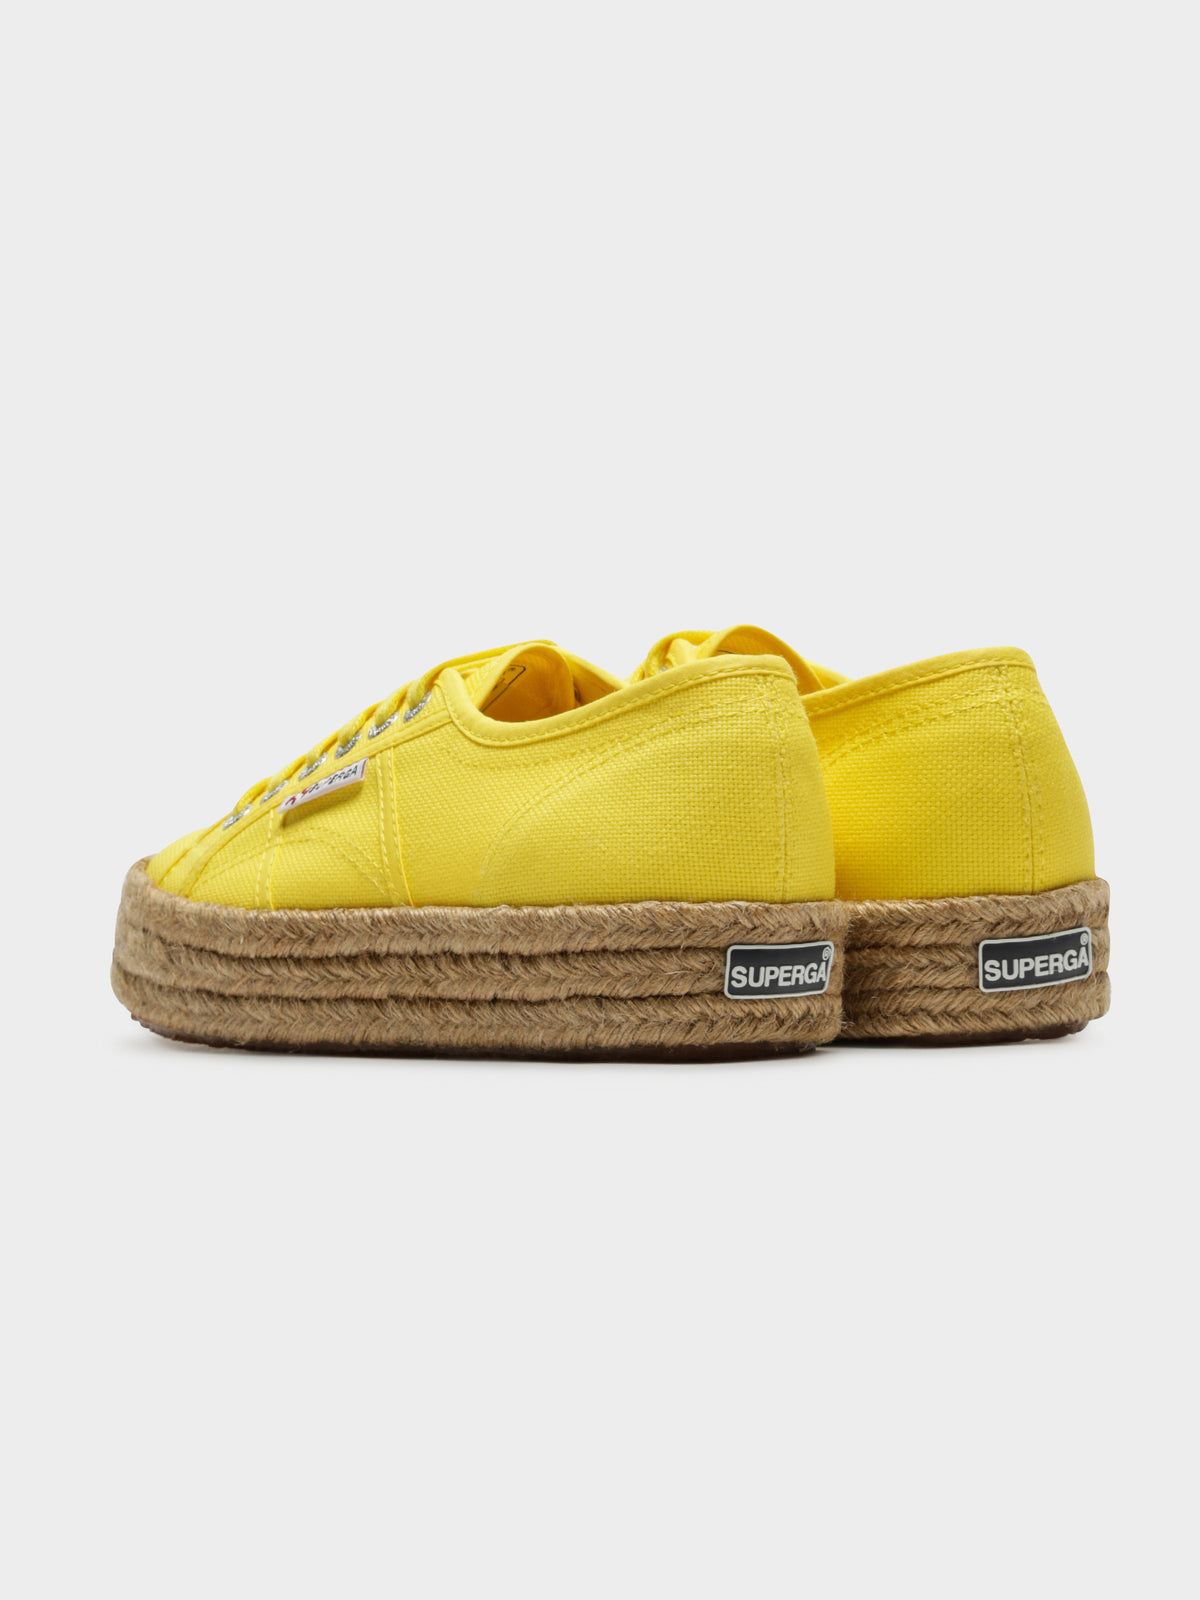 Womens 2730 Cotropew 176 Sneakers in Yellow Sunflower